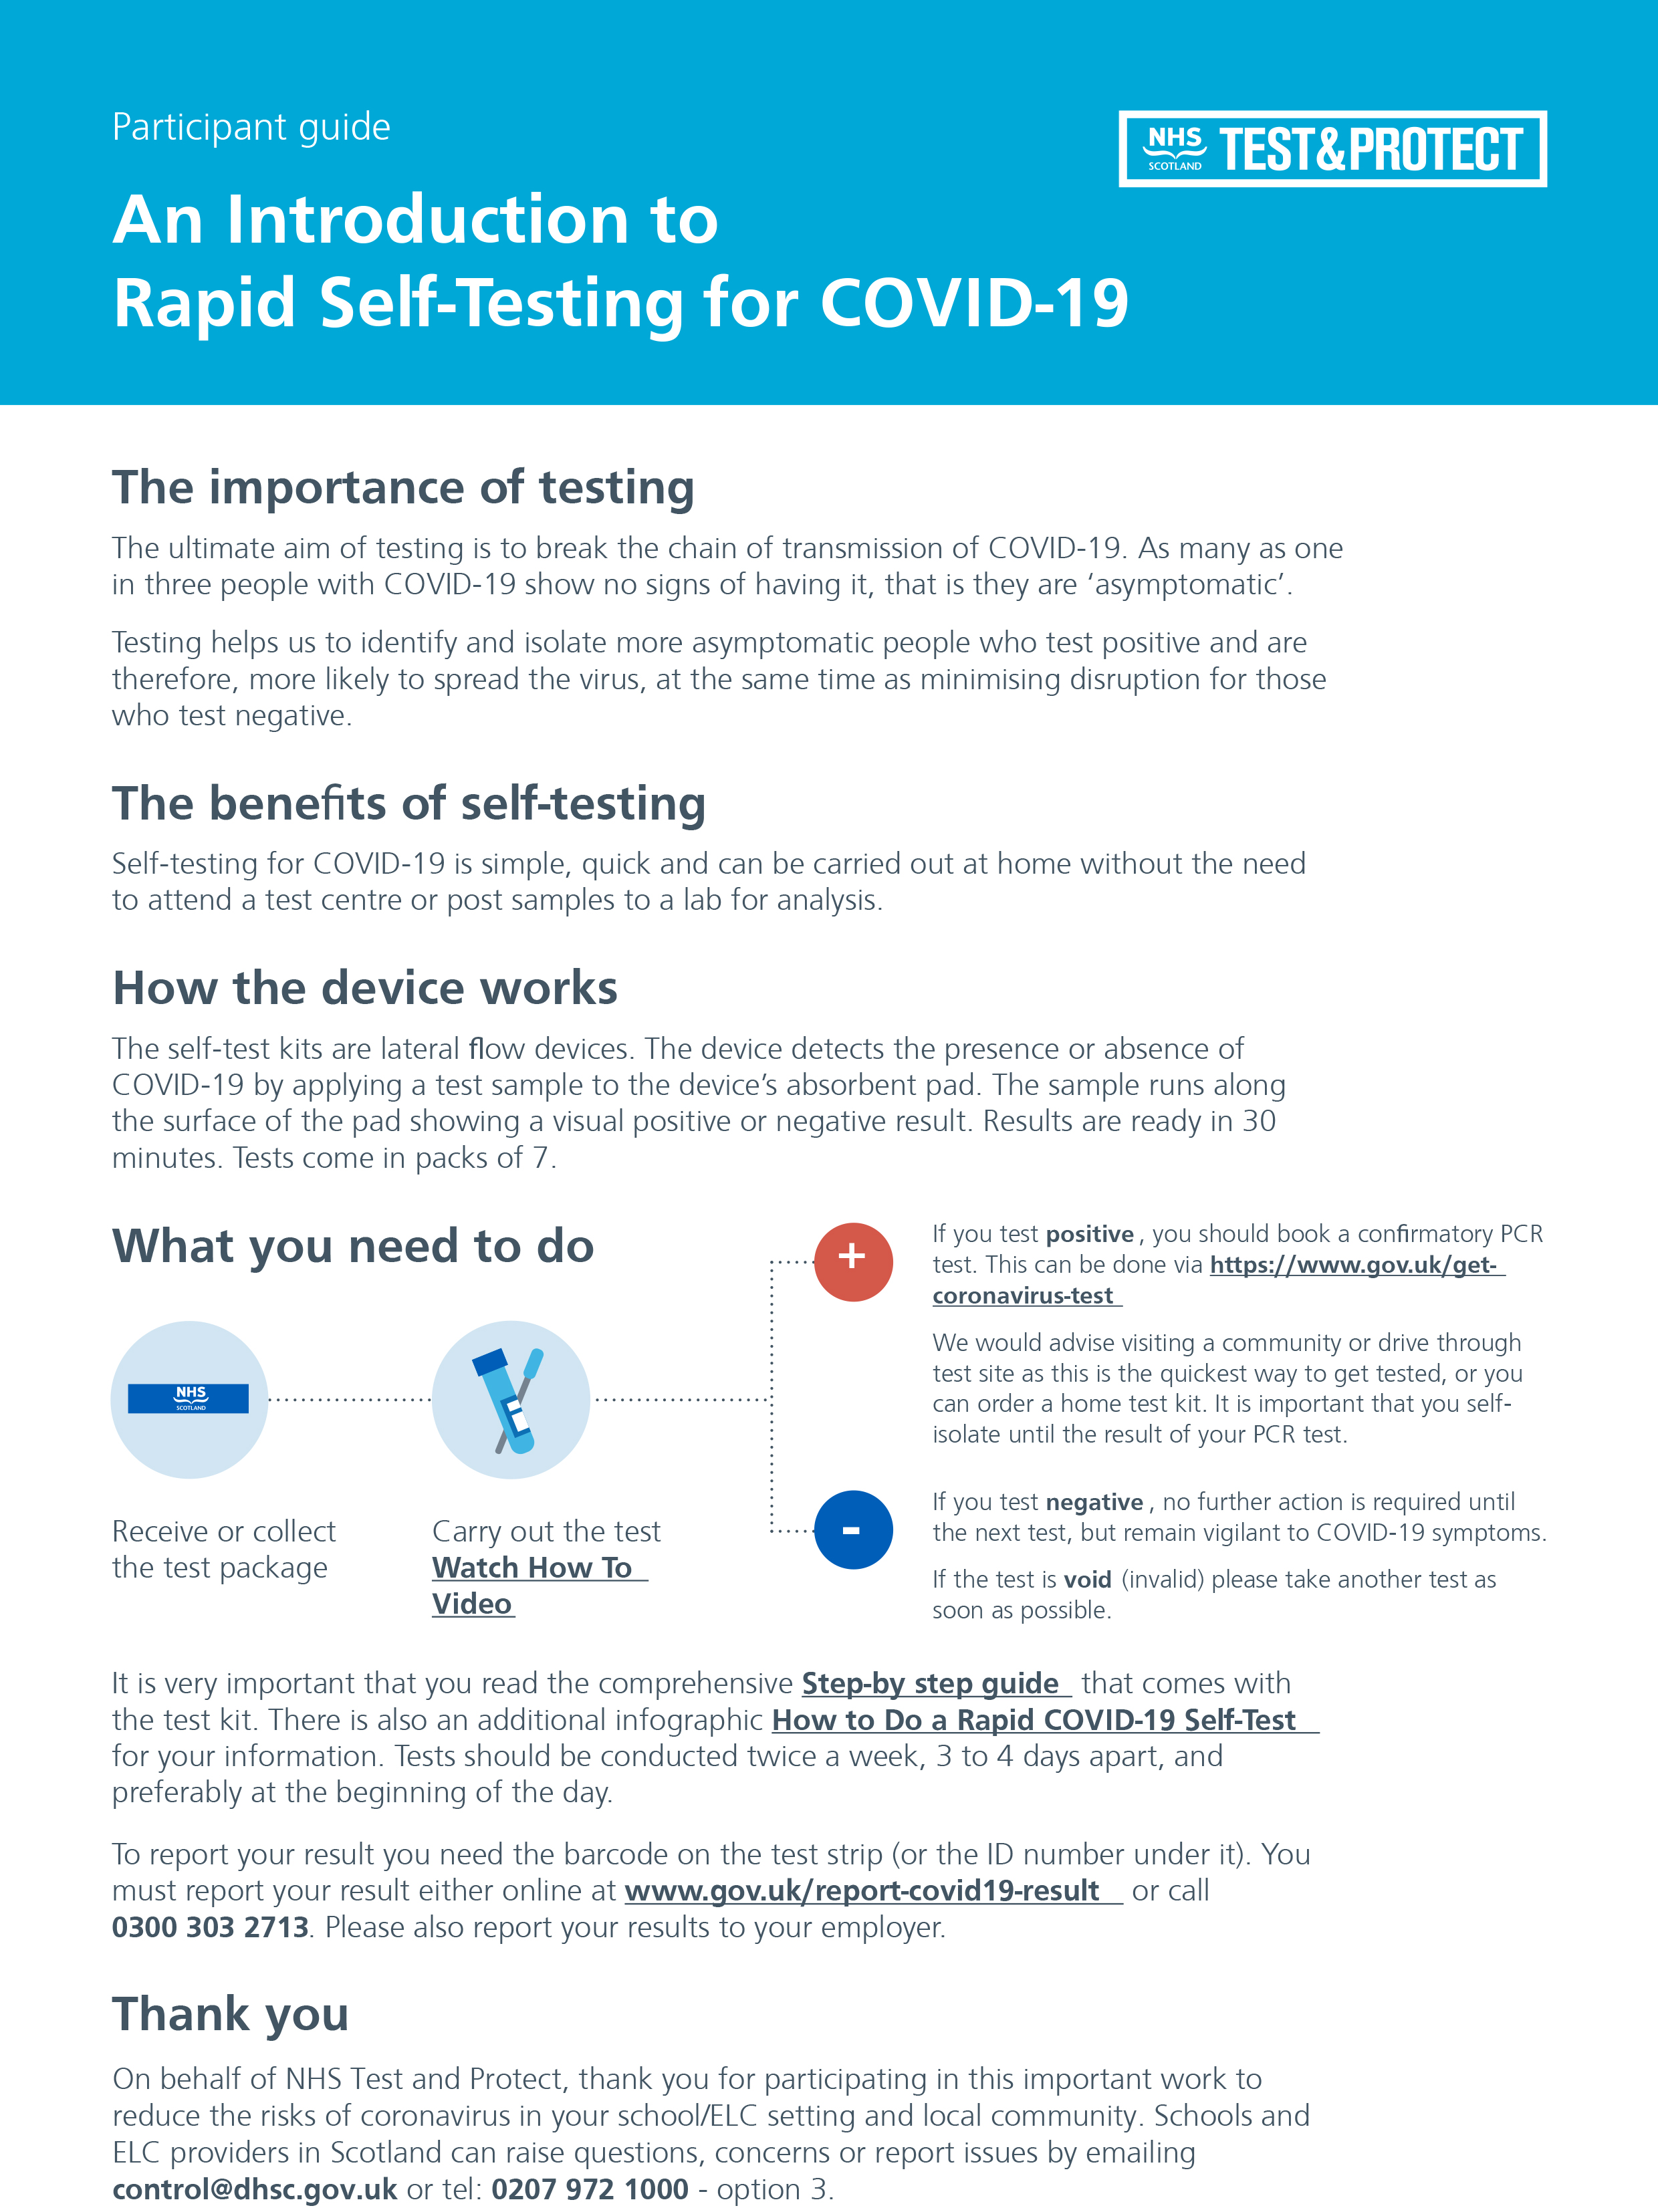 NHS An Introduction to Rapid Self Testing for COVID 19